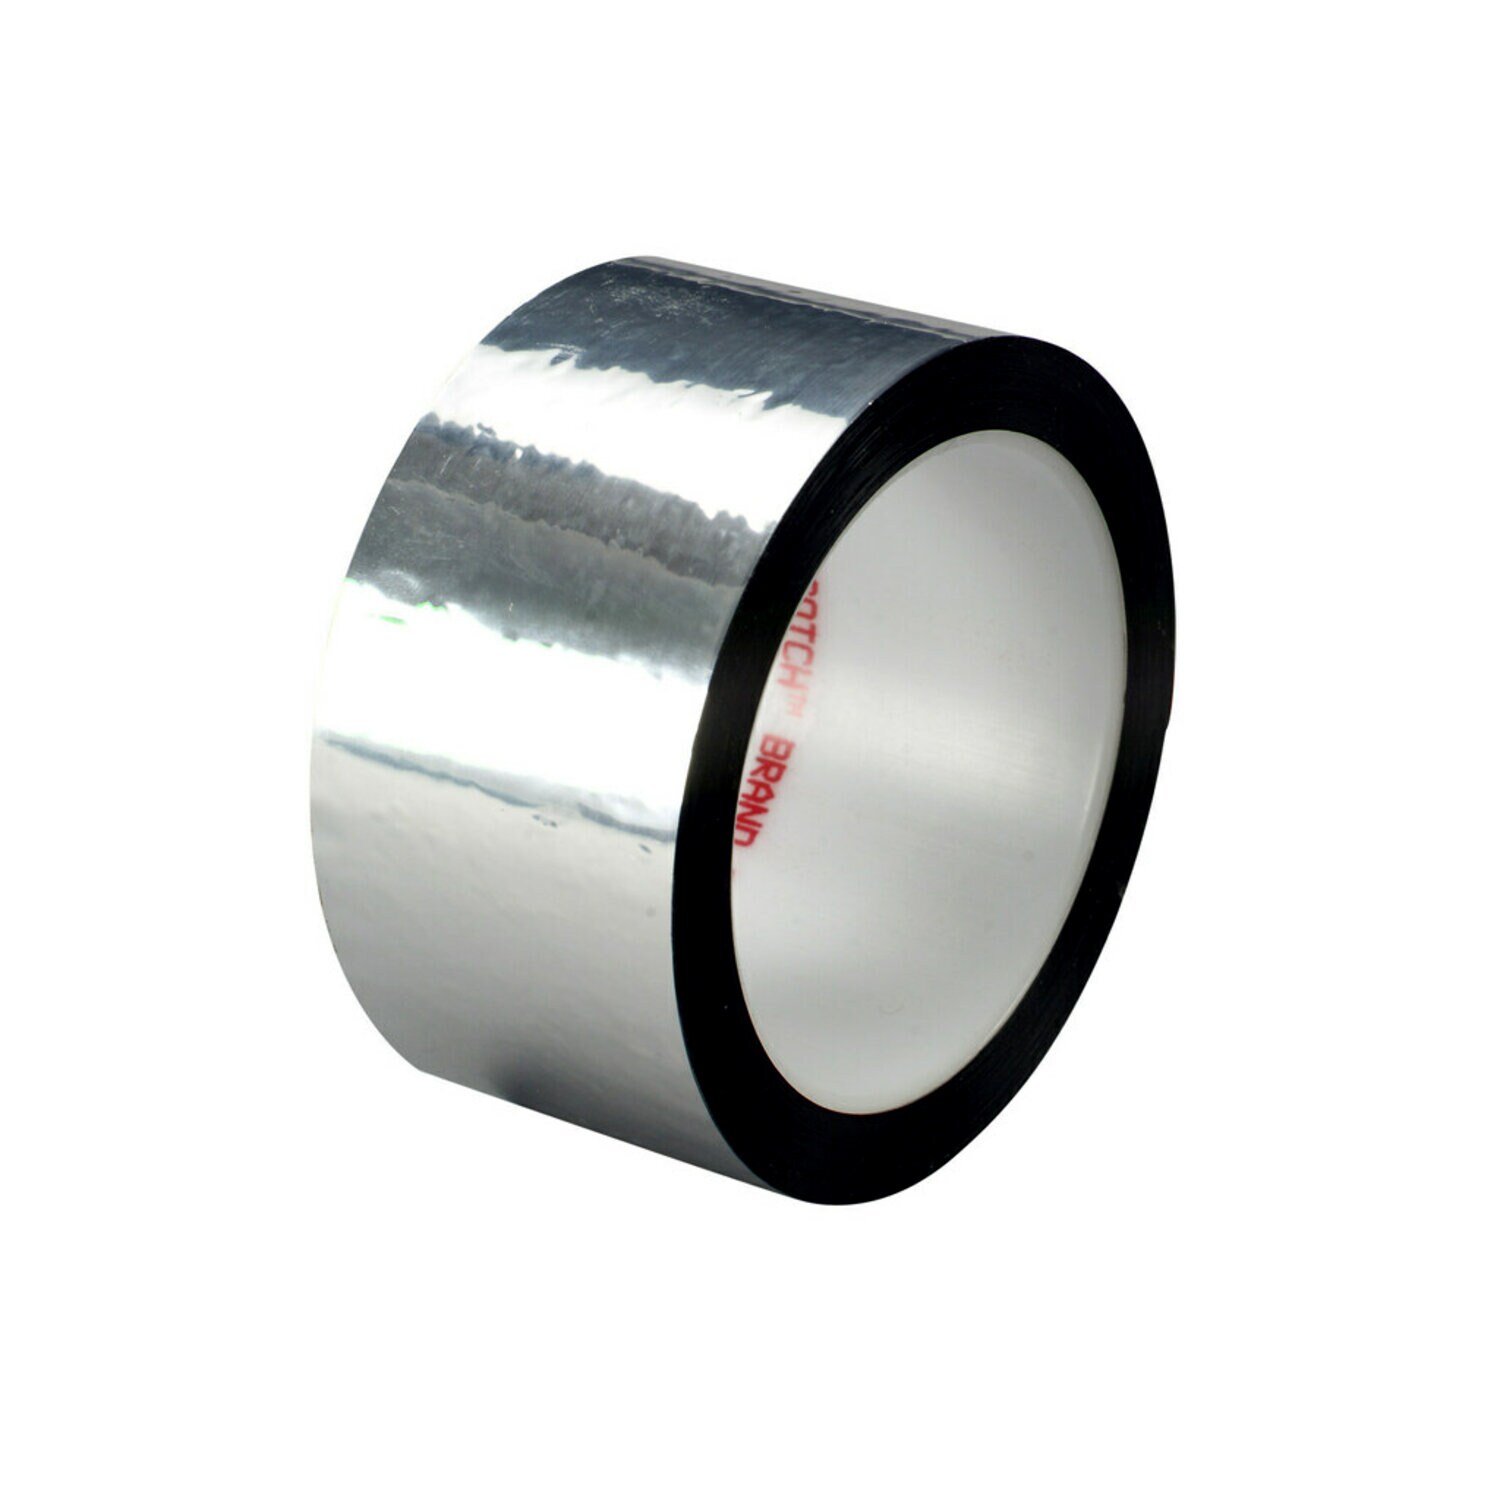 3M™ Sheet and Screen Label Material 7214SA, Brushed Silver Polyester, Roll,  Config